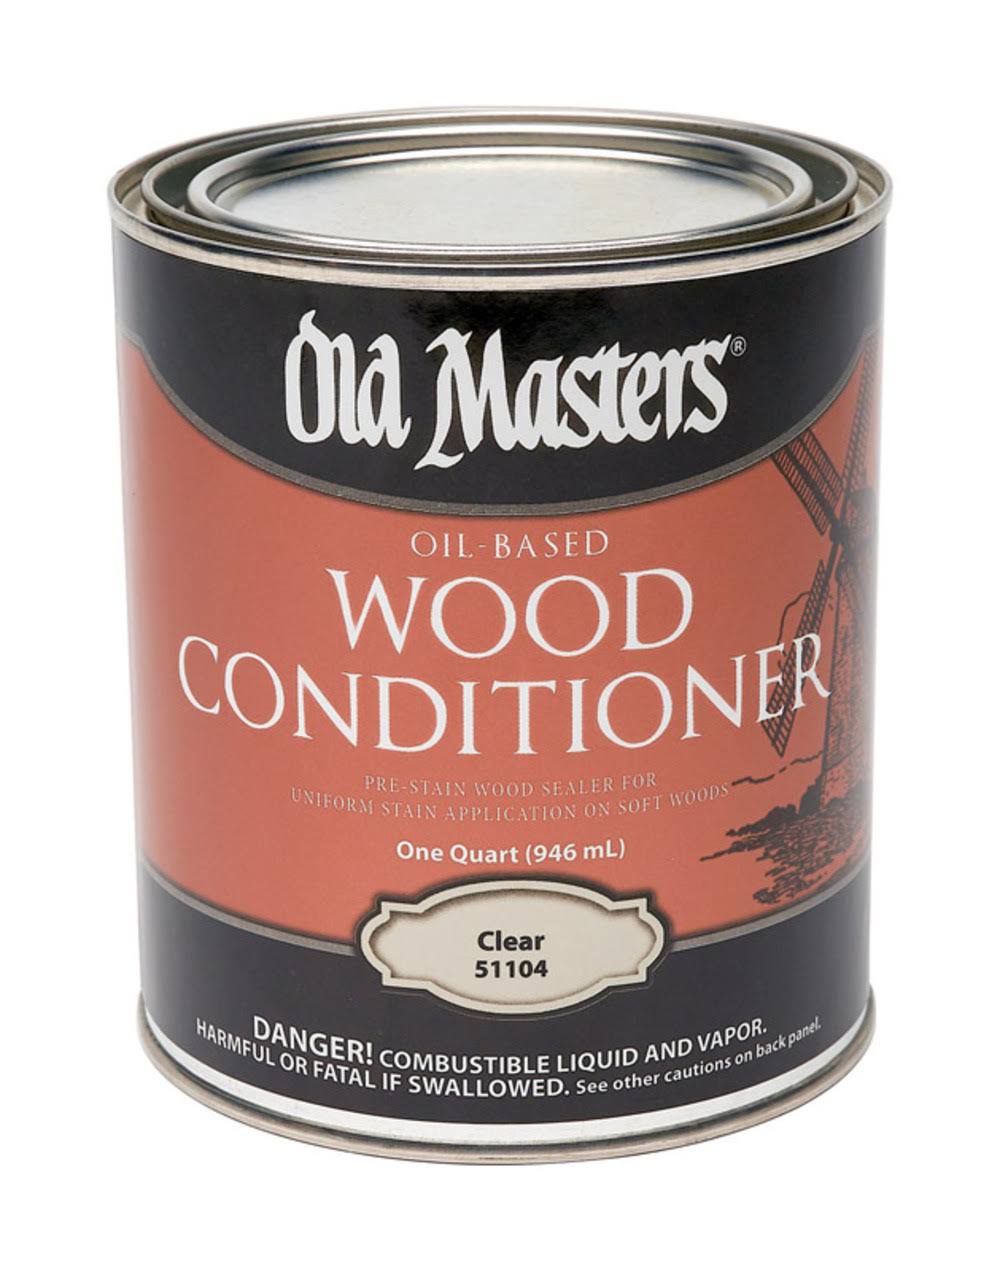 Old Masters 1626464 1 Qt. Oil-based Wood Conditioner, Clear - Pack Of 4 Old Masters Multicolor